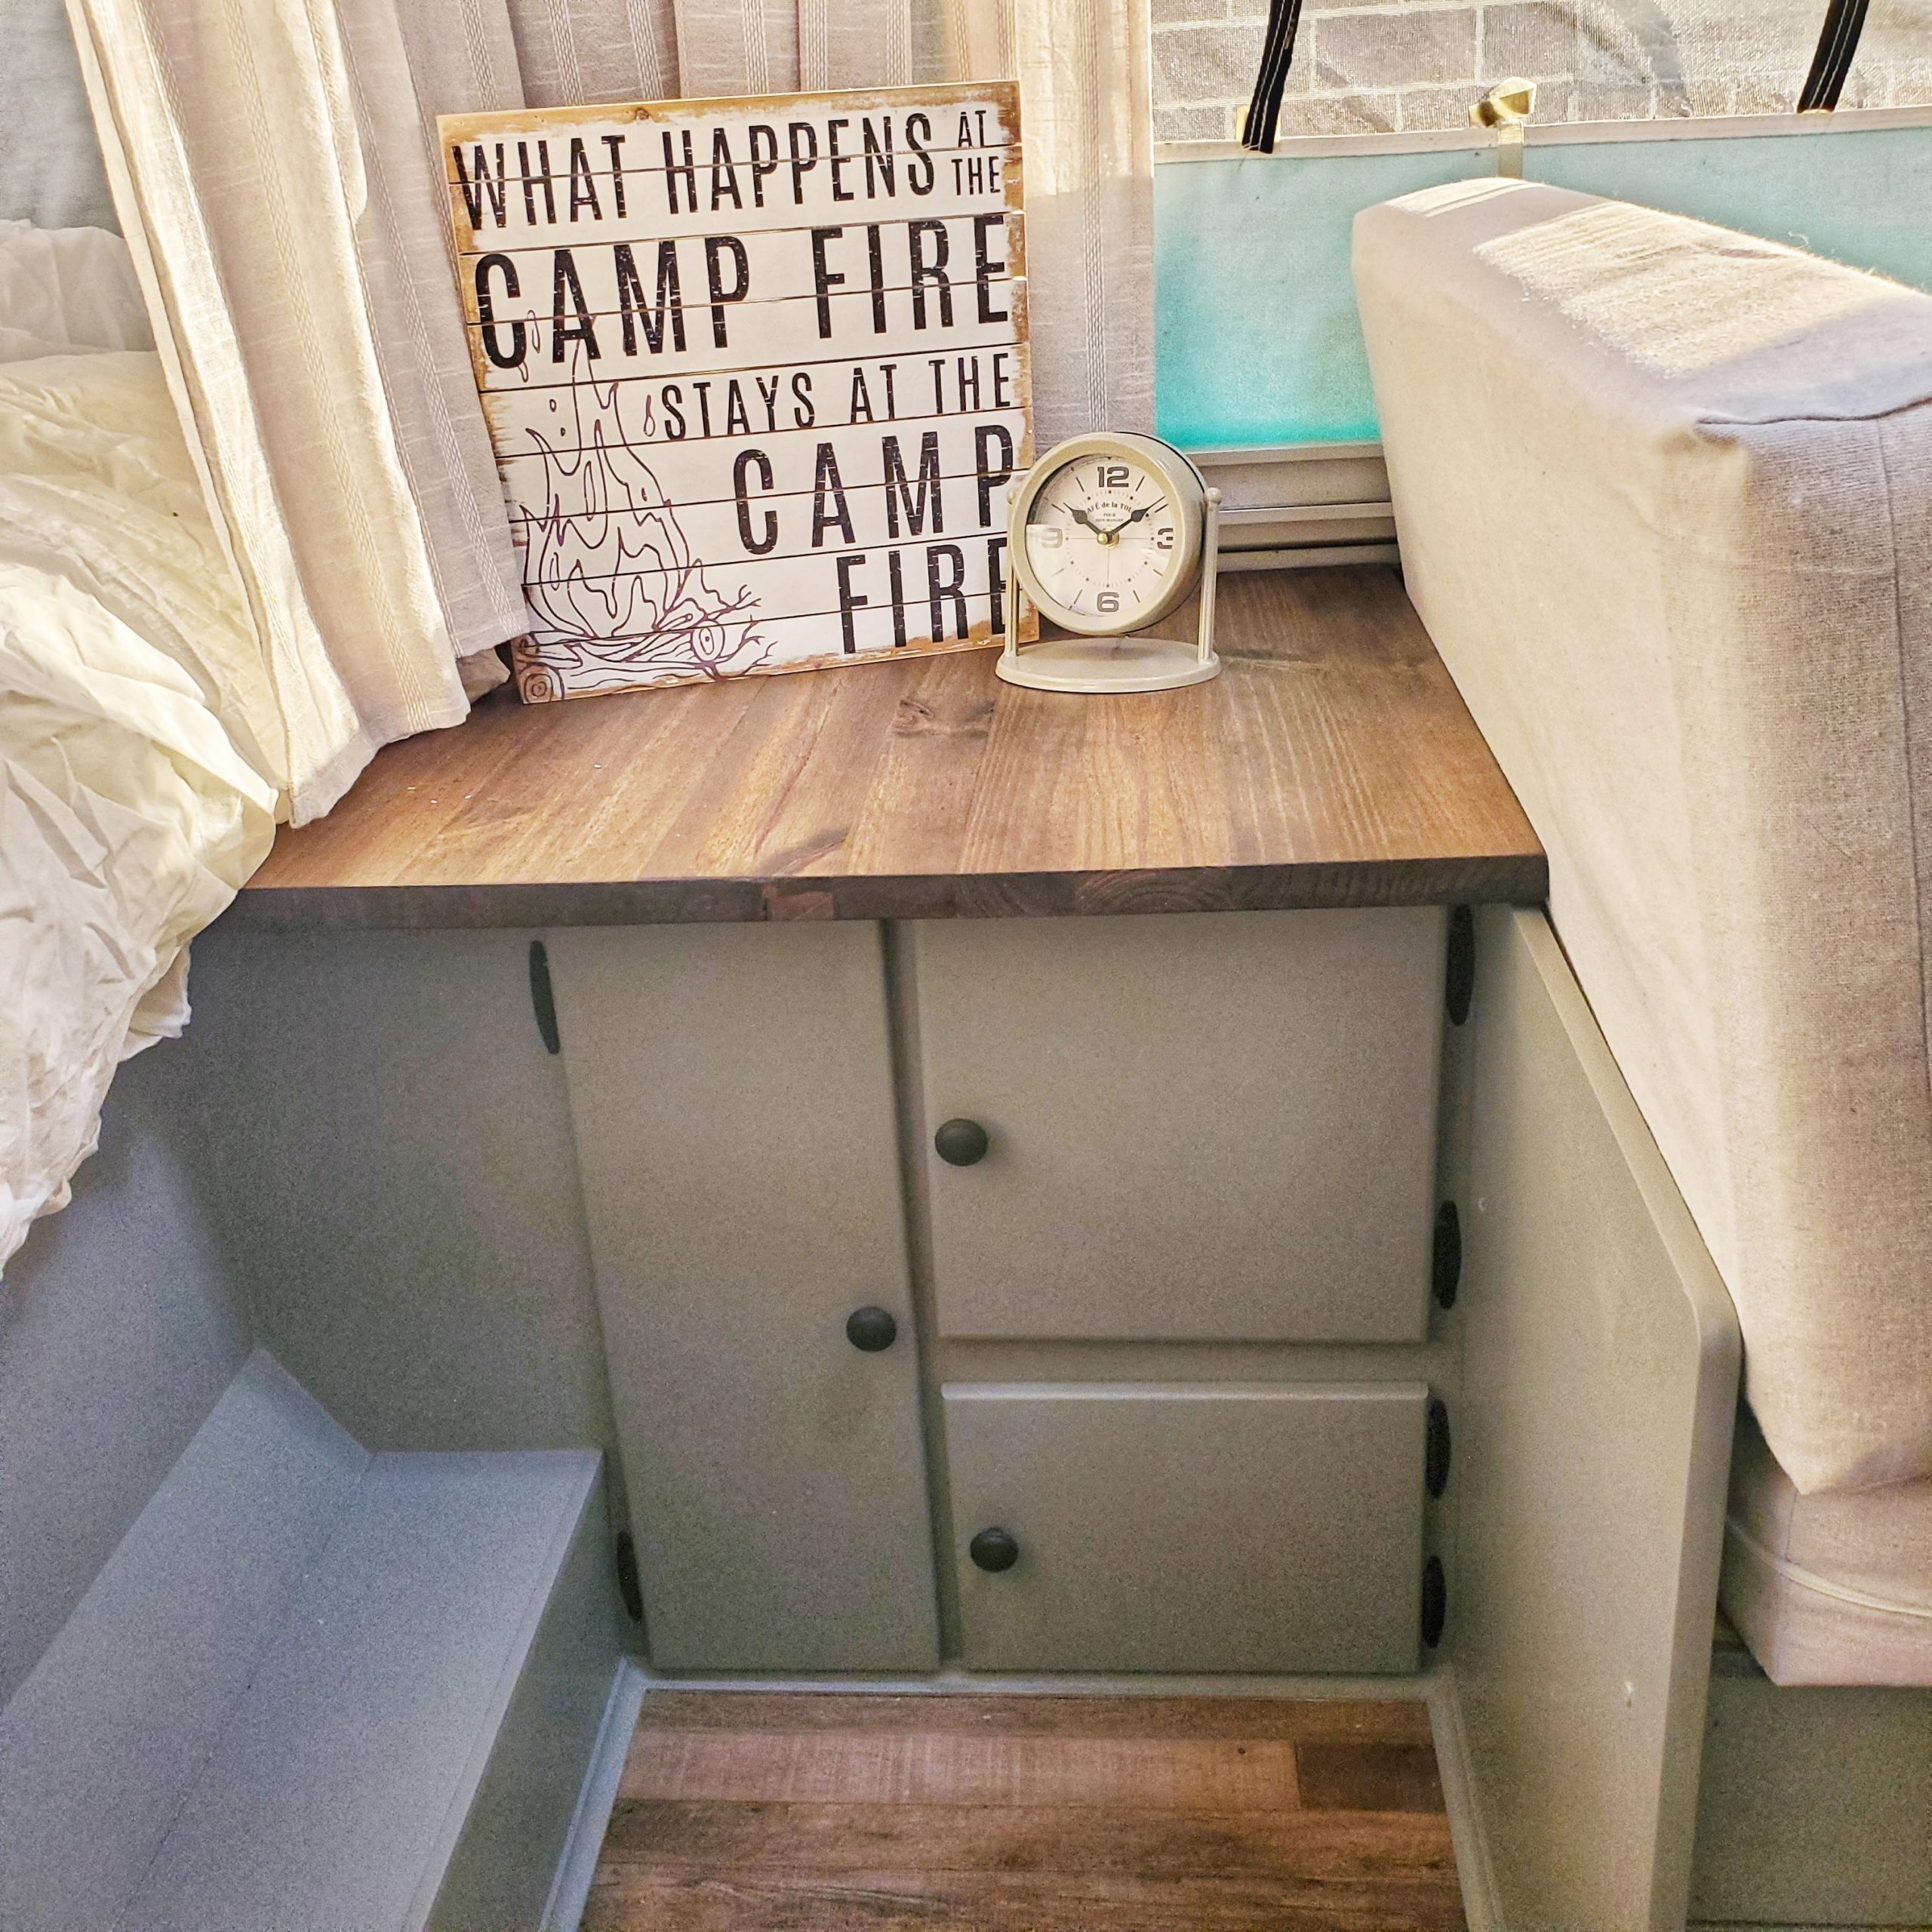 Update your RV with a modern farmhouse look with gray painted cabinets, curtains, a new wood stained table, and updated countertops for less than $500!